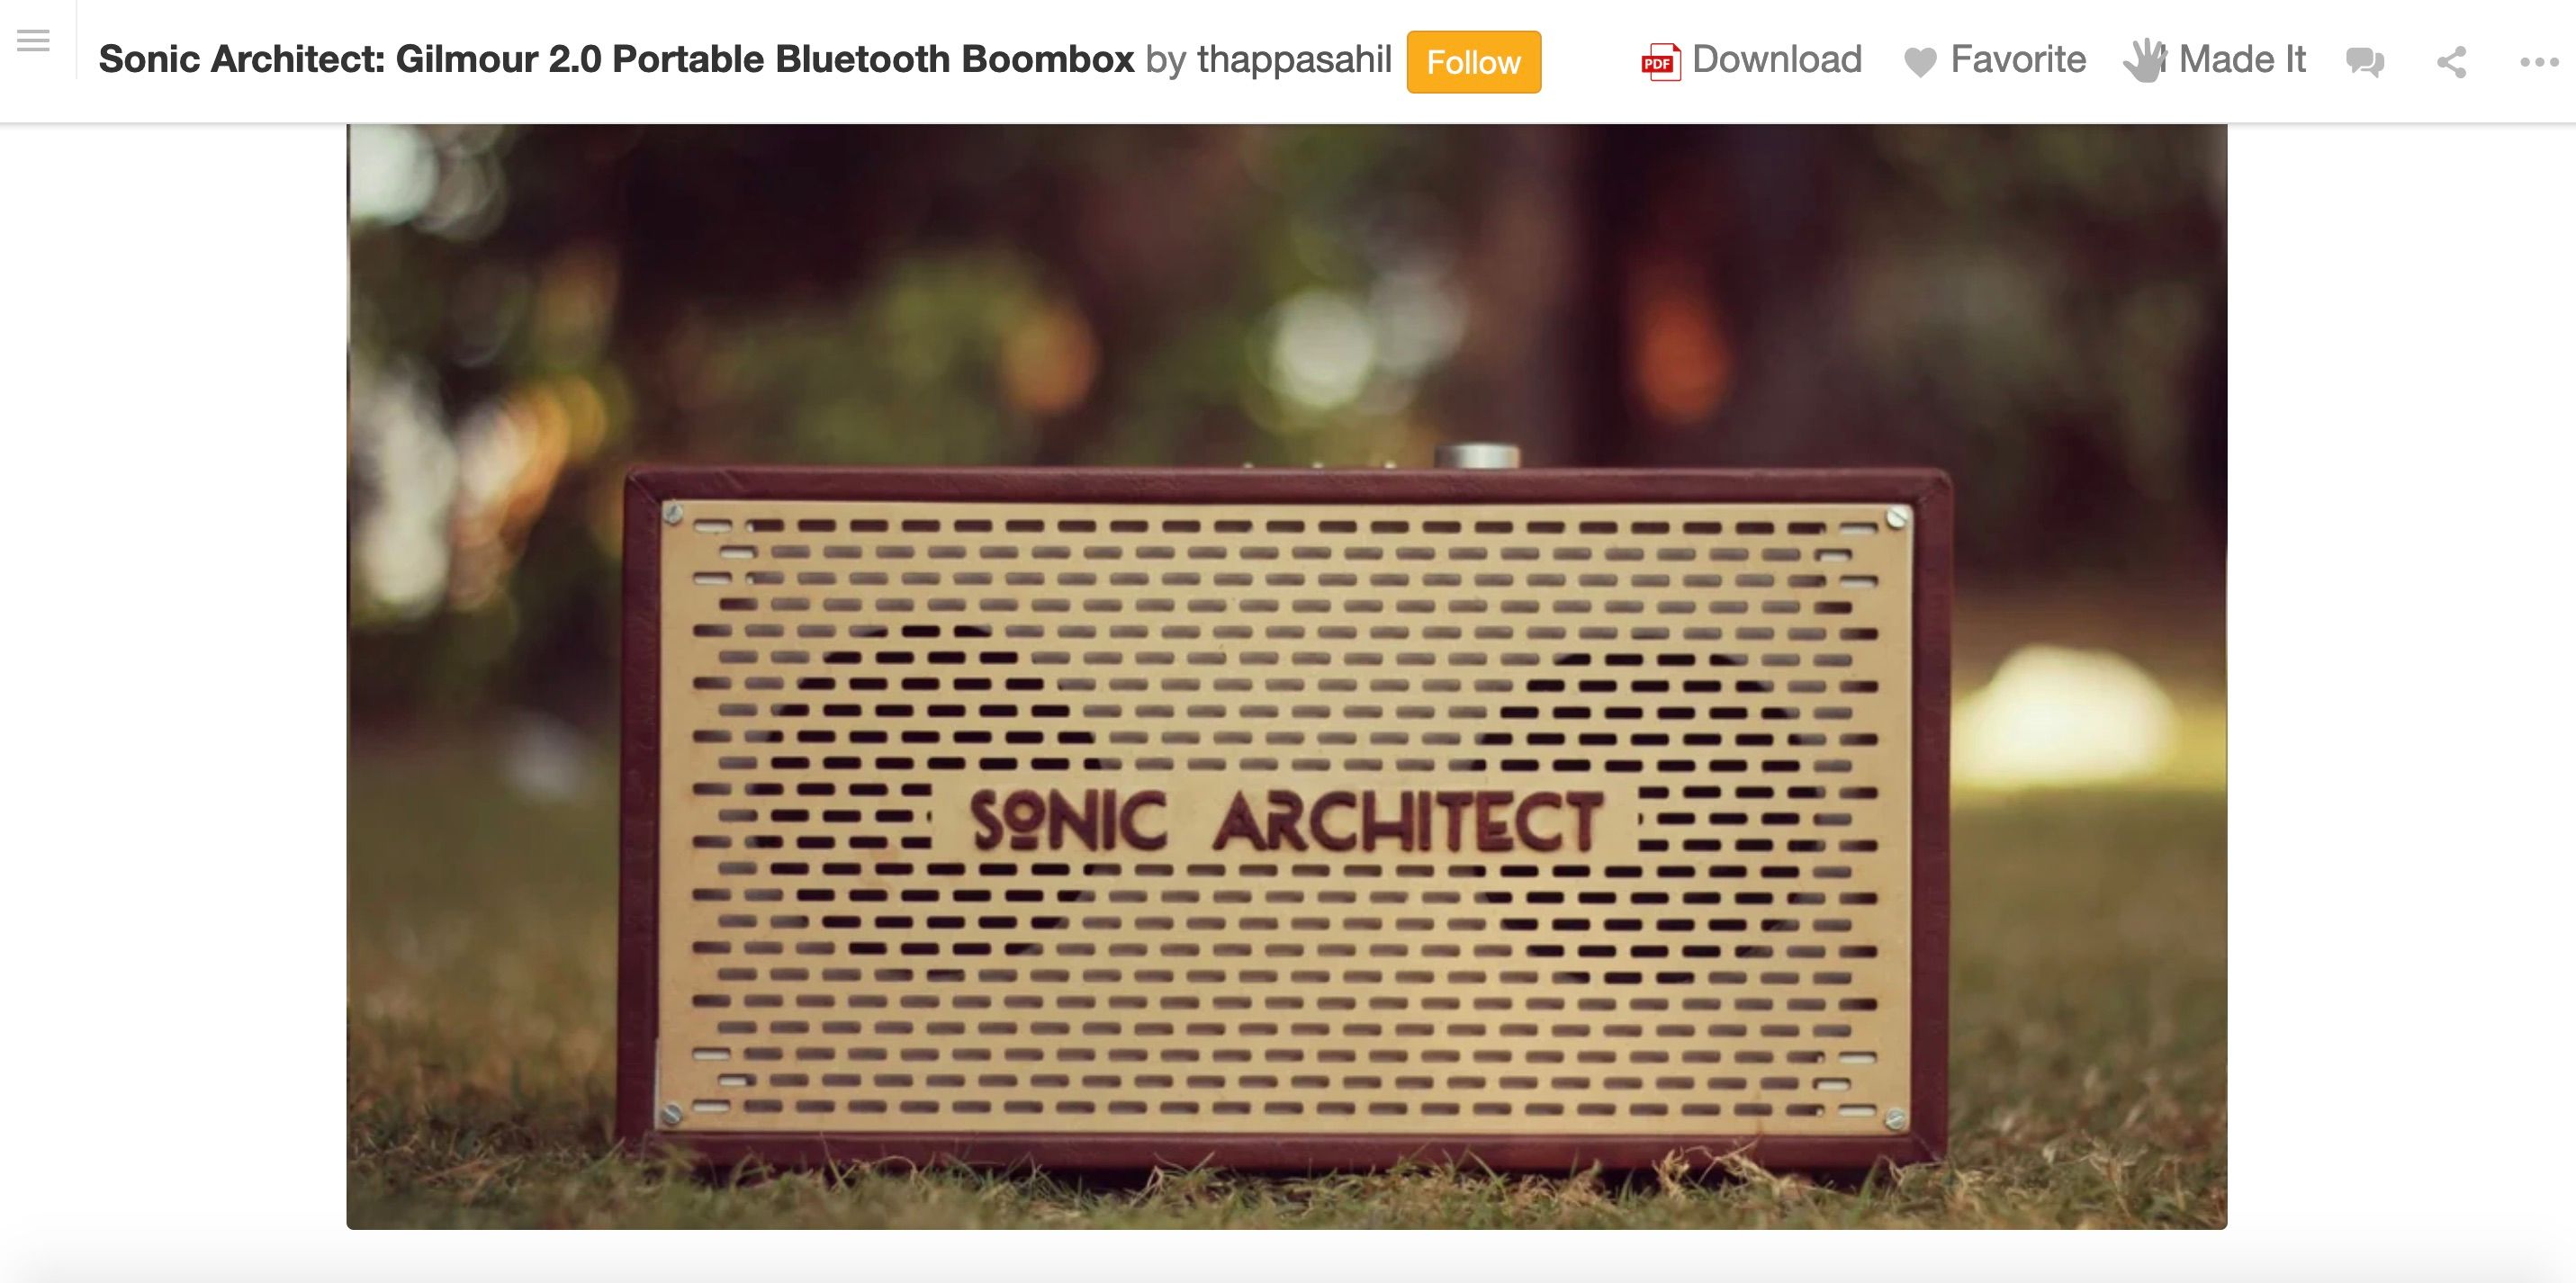 A screenshot showing a photo of a vintage-look oblong speaker with the name 'sonic architect' on the front panel